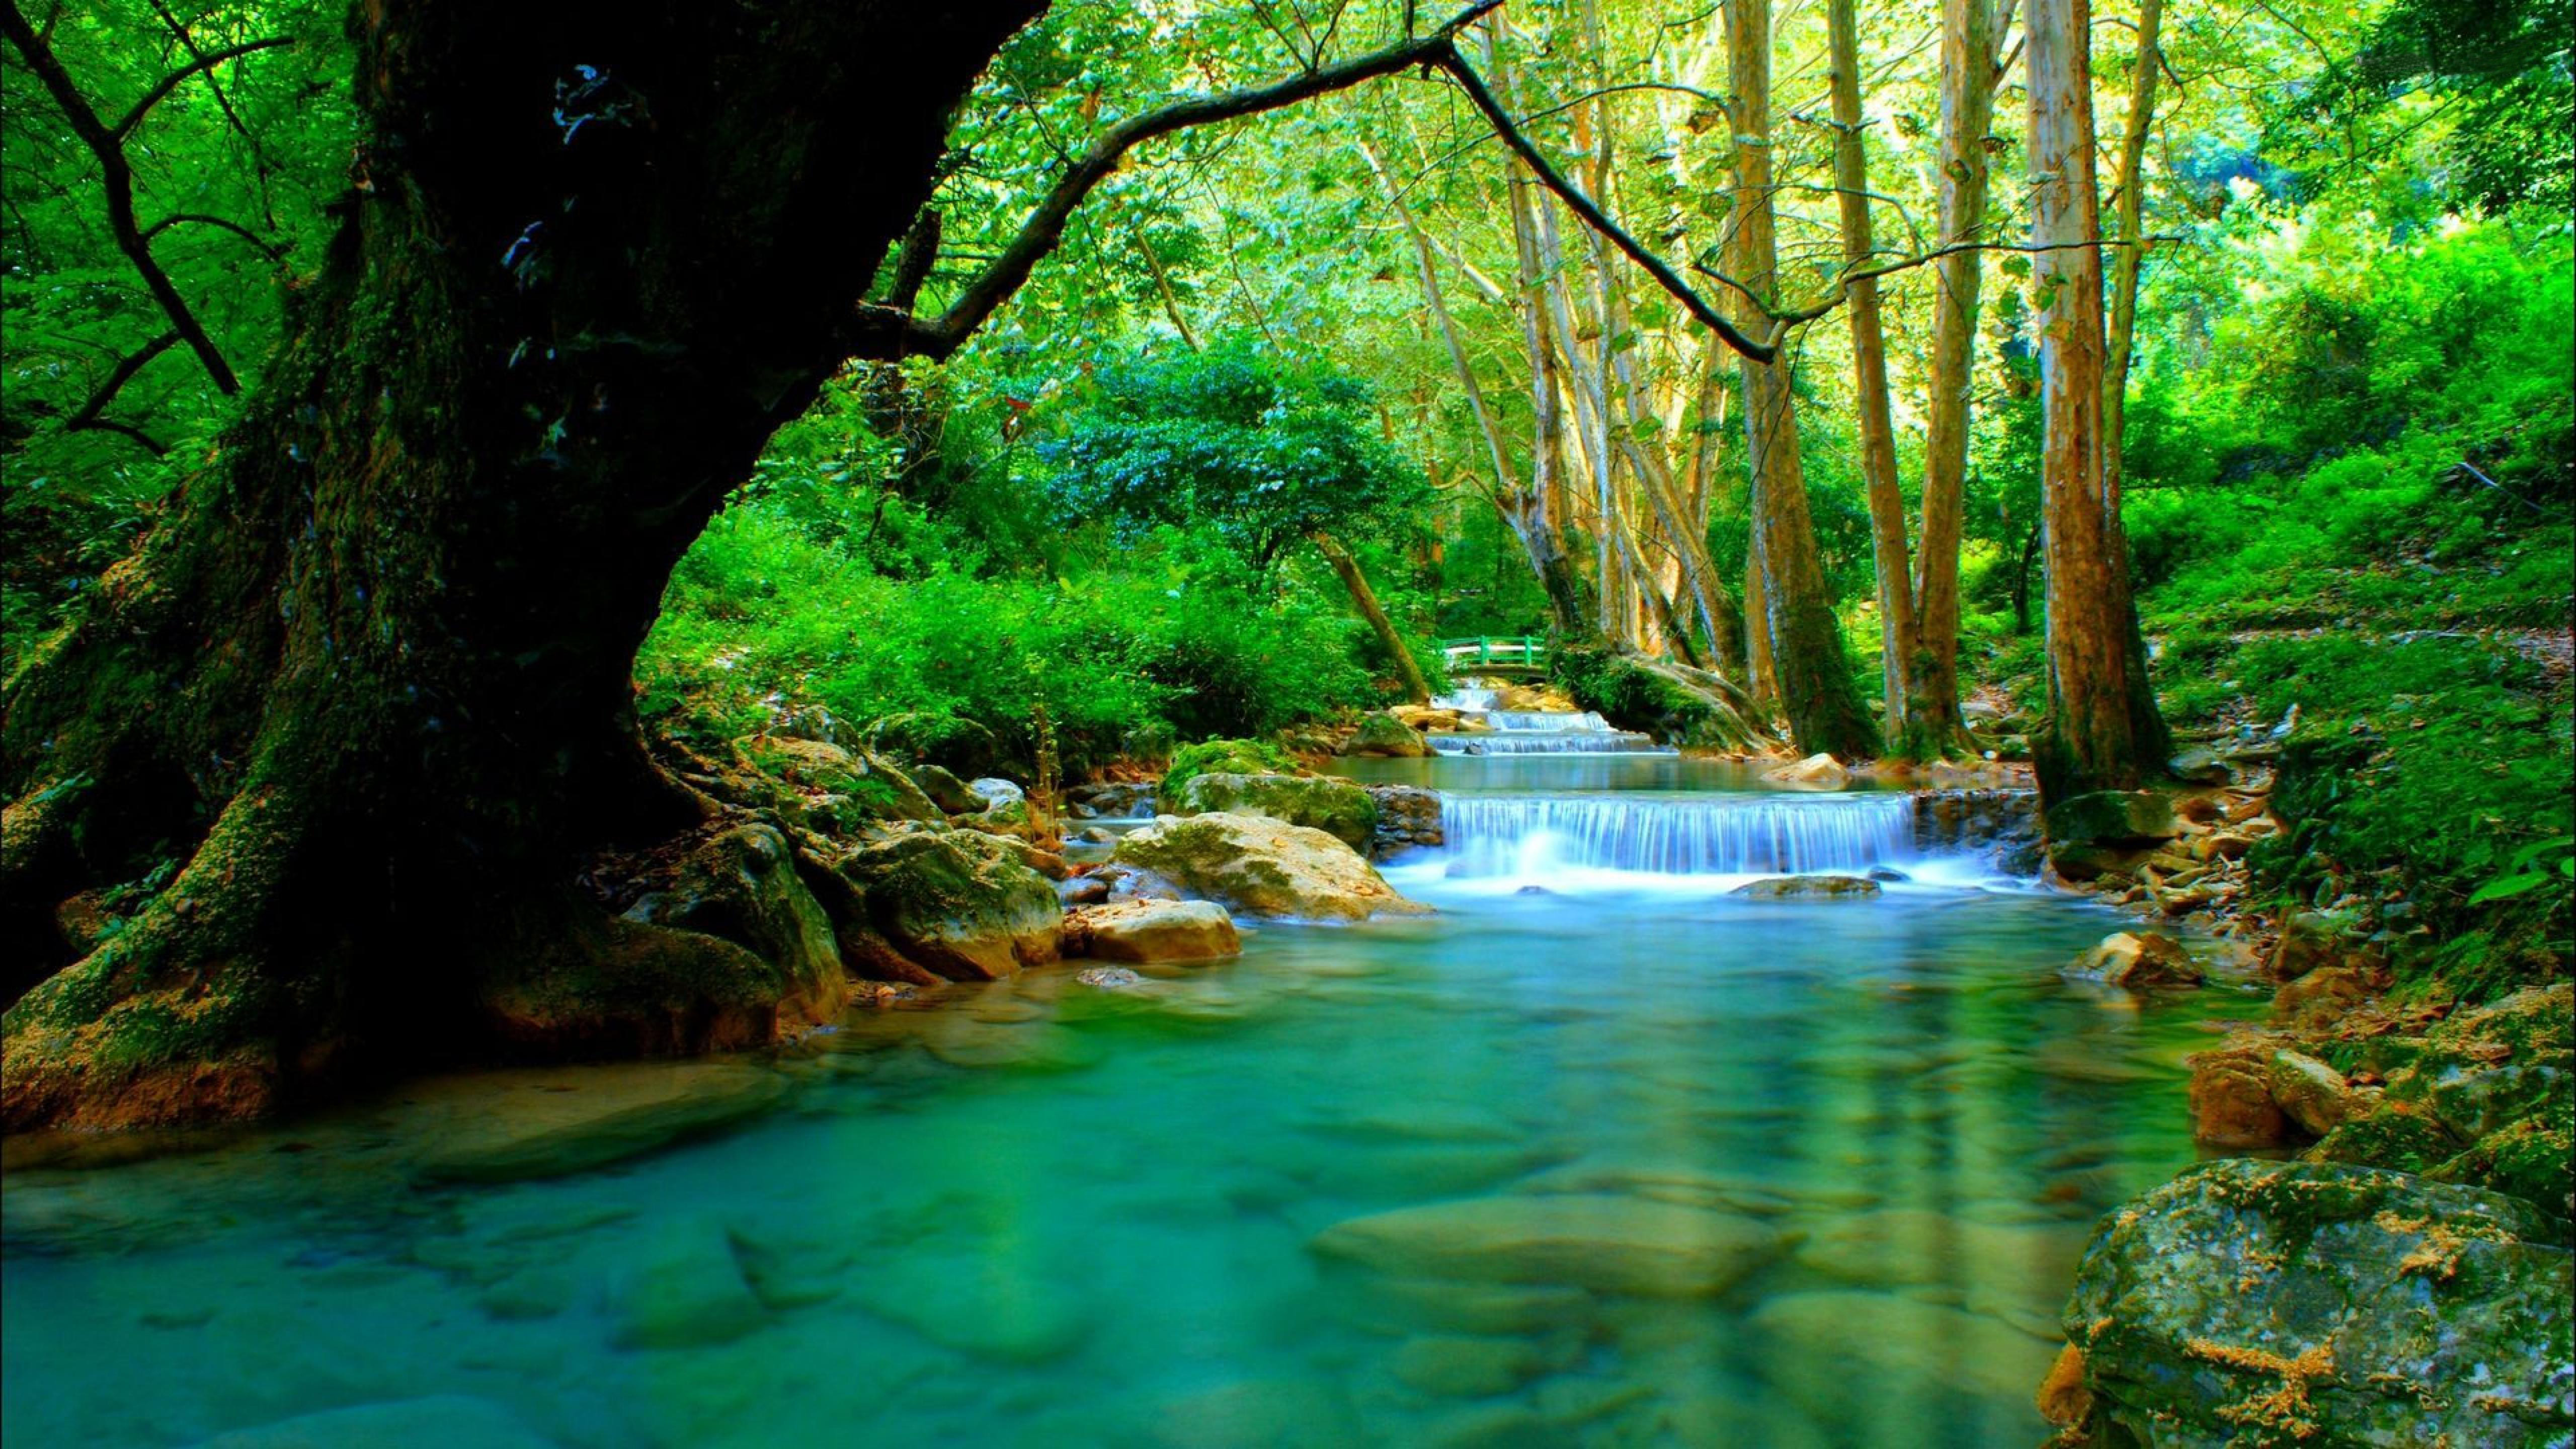 Forest river with cascades turquoise water rocks-trees Desktop Wallpaper HD  for mobile phones and laptops 5120x2880 : 